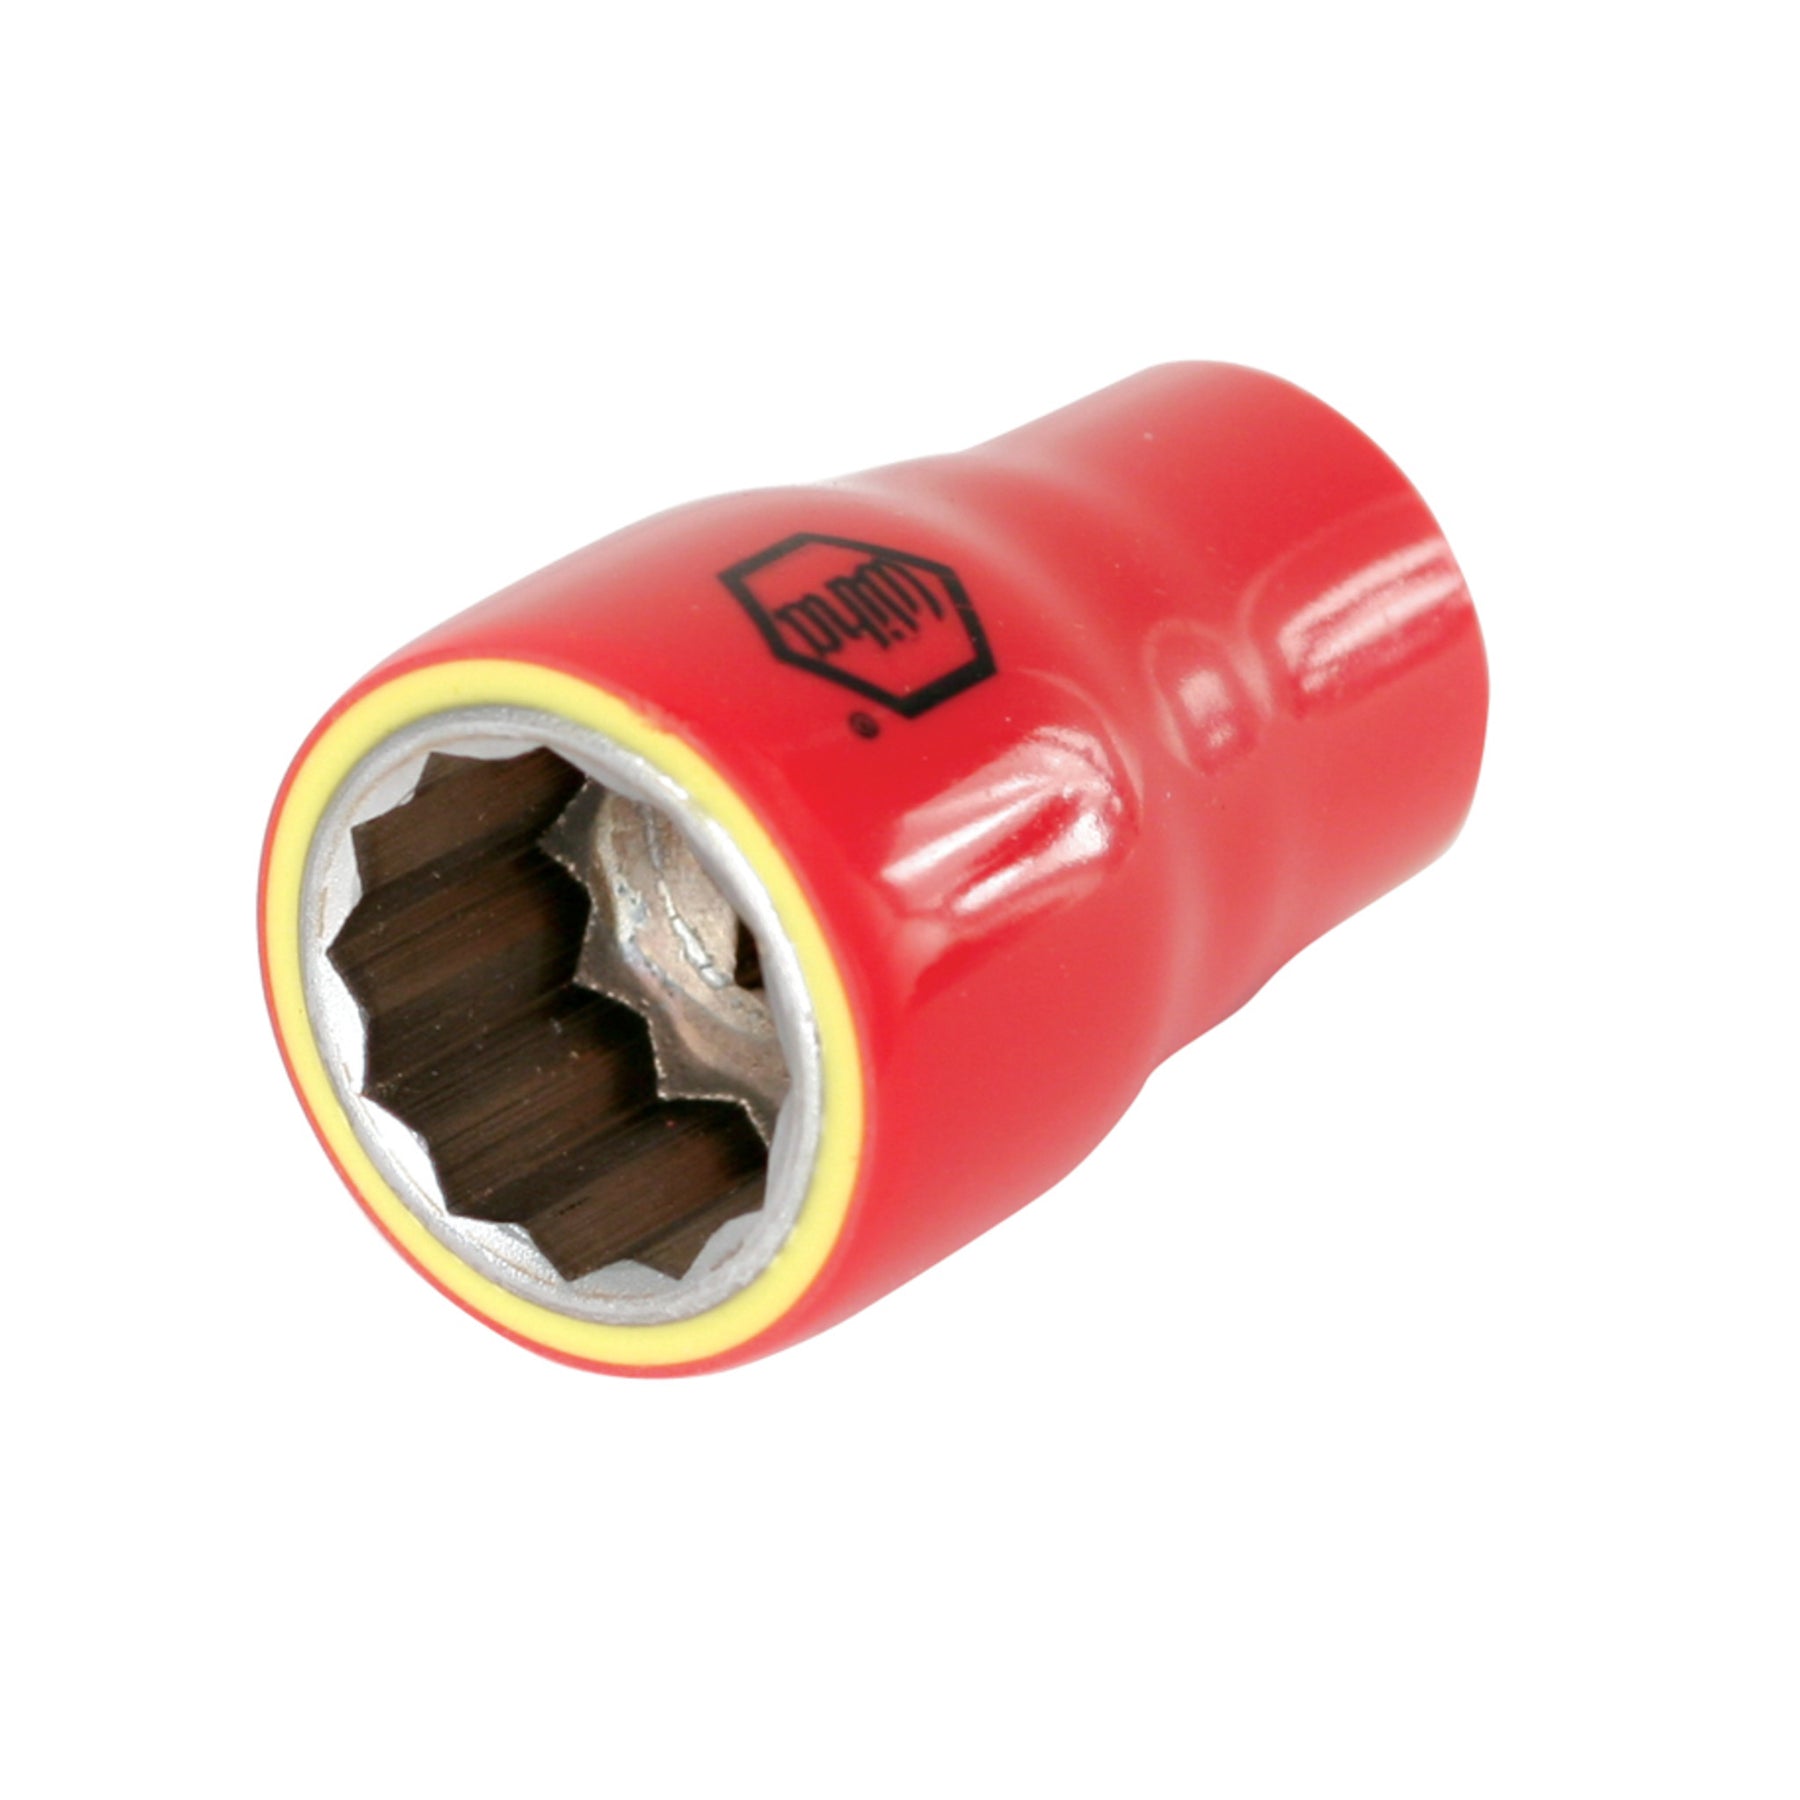 Insulated Socket 1/2" Drive 21mm